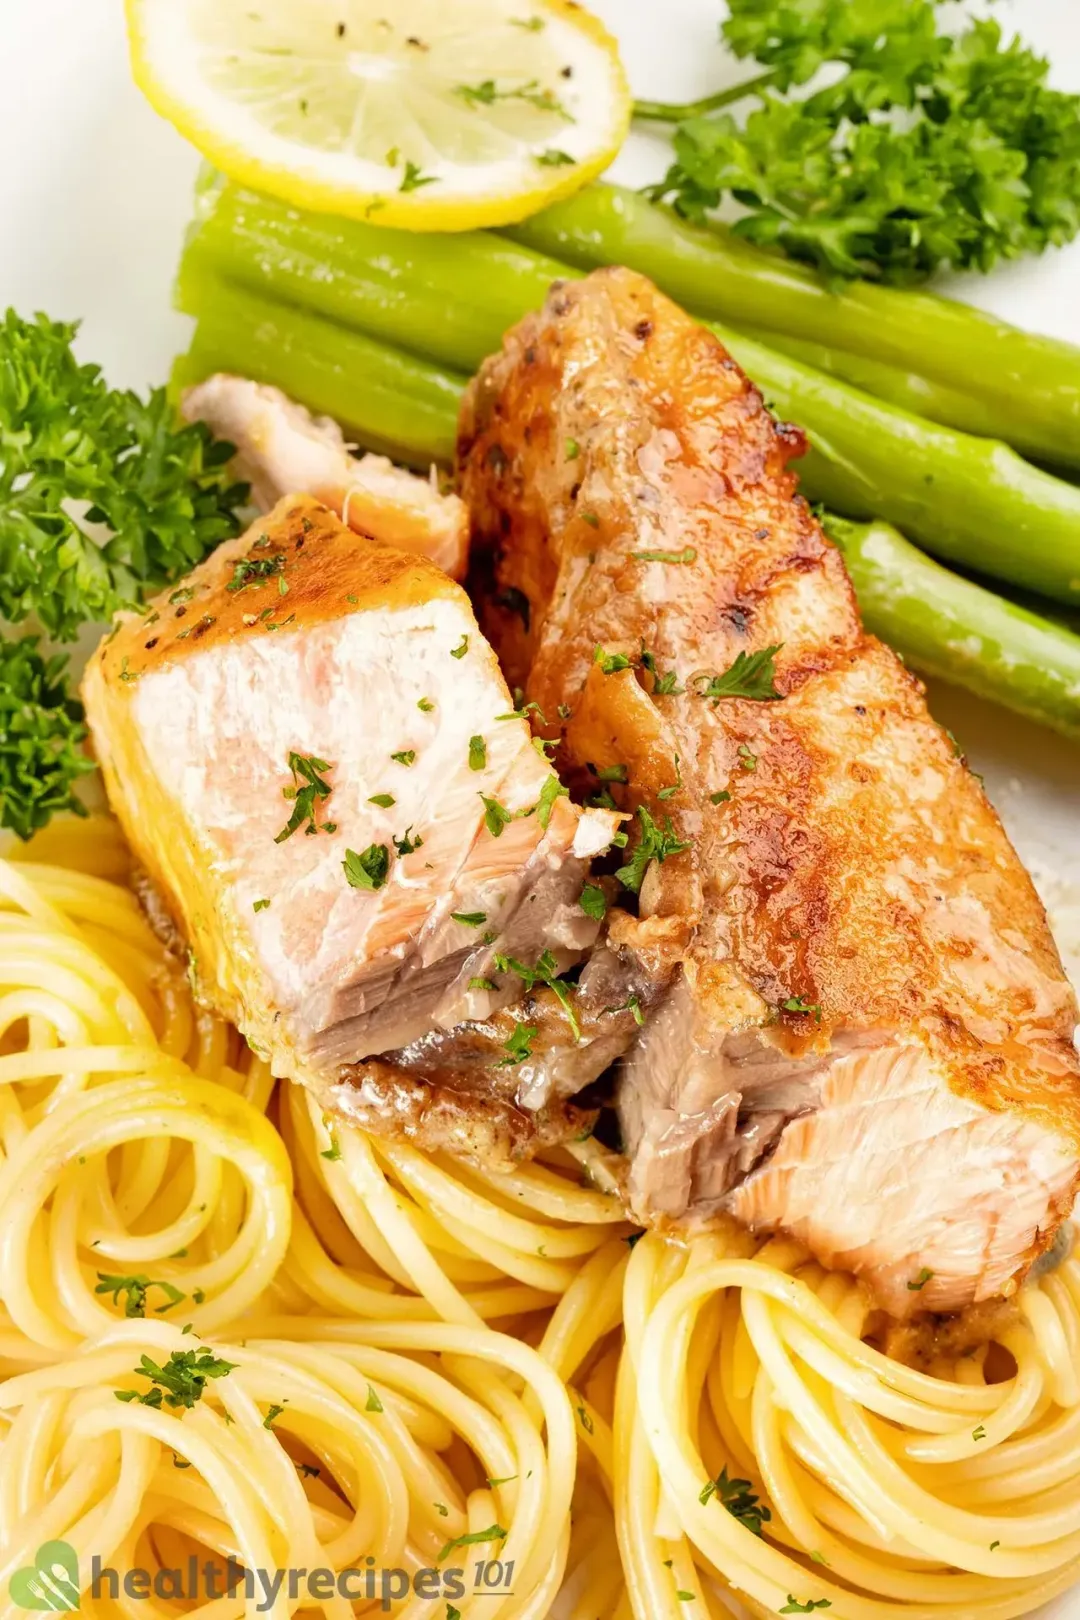 Two halves of a seared salmon filet sitting on a bed of cooked pasta and surrounded with cooked asparagus, a lemon slice, and parsley.